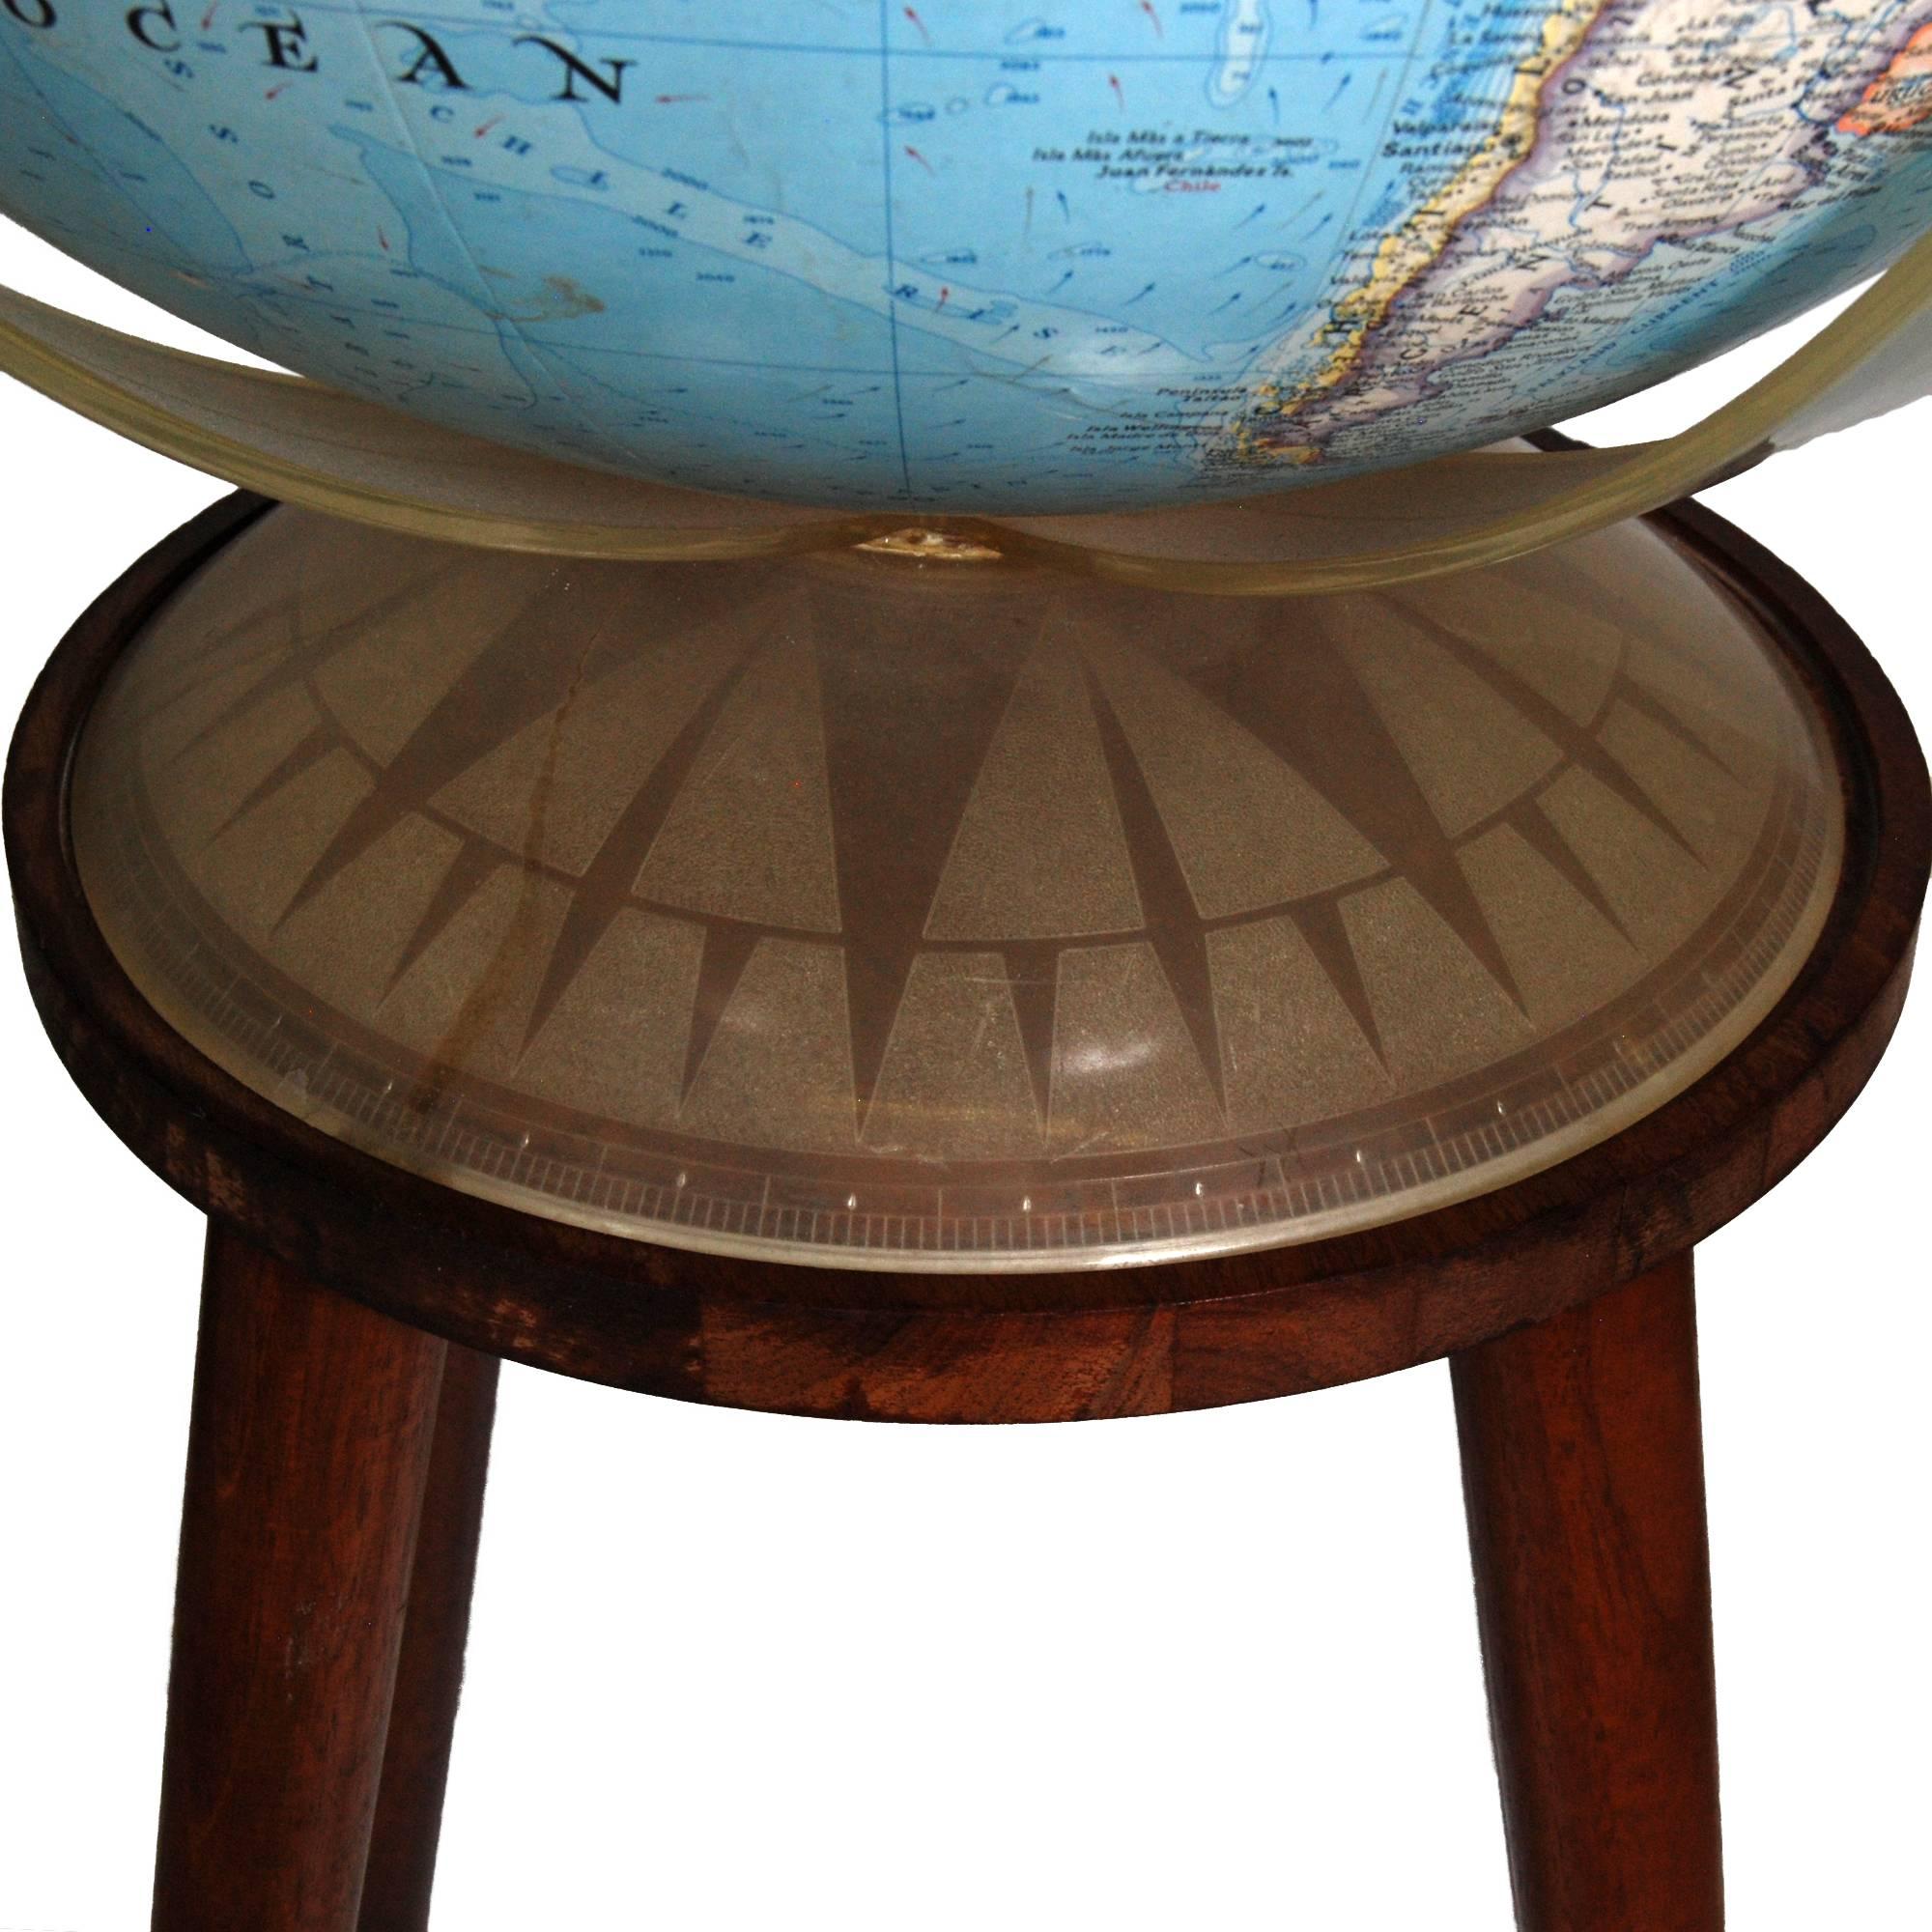 national geographic globe for sale